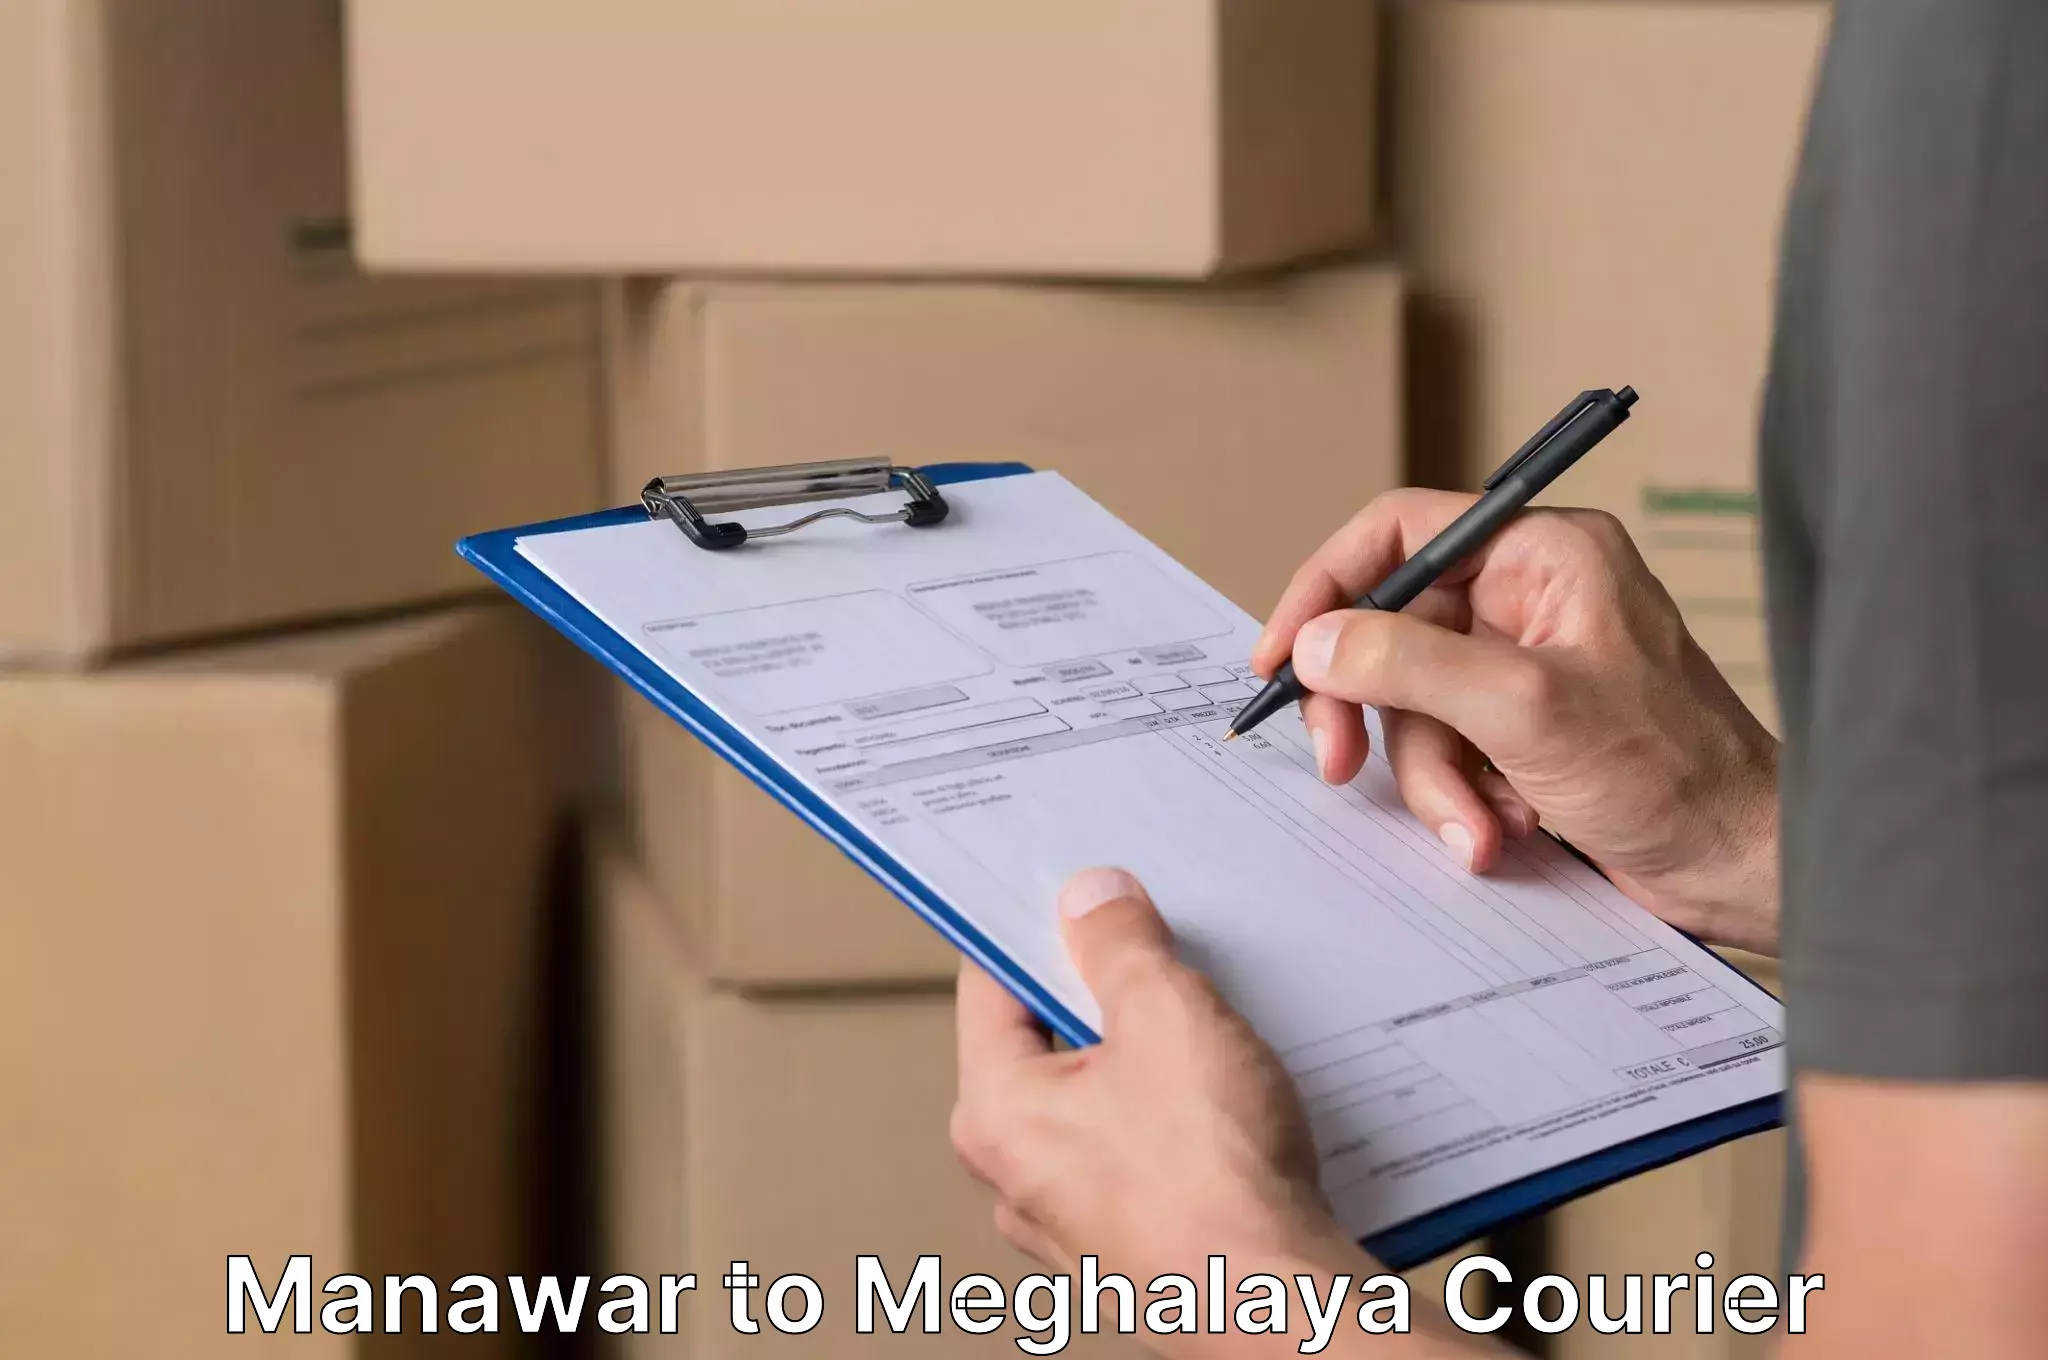 Professional movers and packers Manawar to Tura